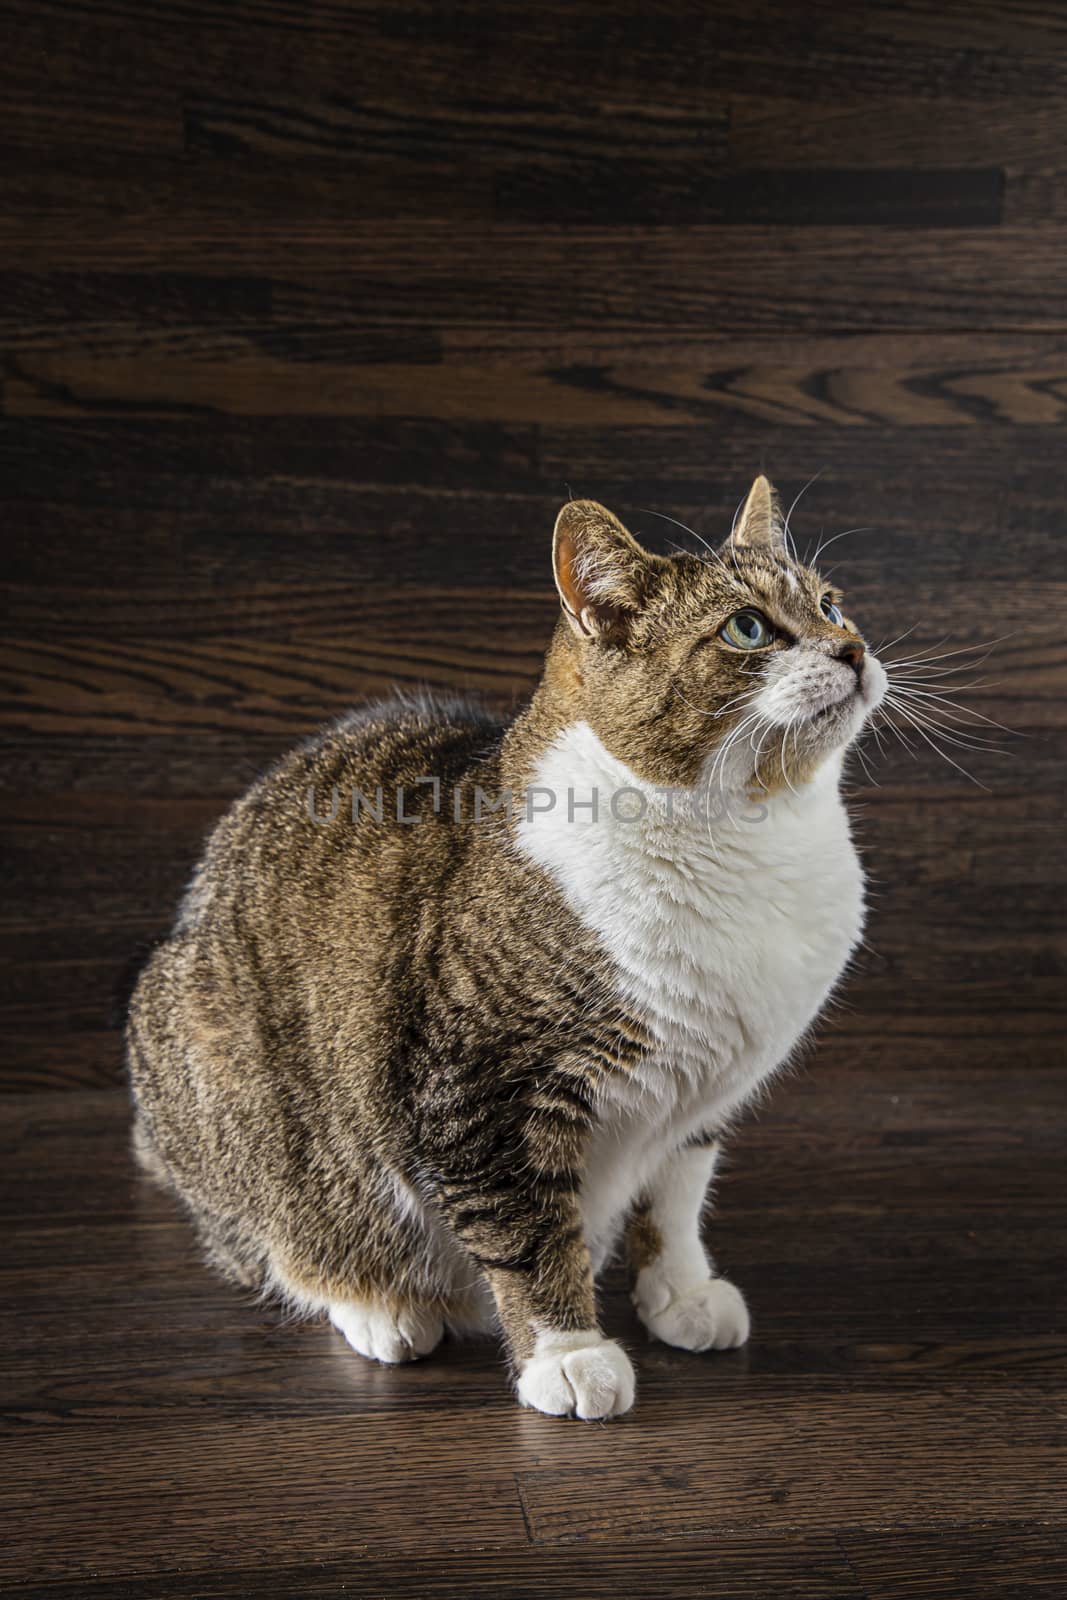 Tabby cat, about to jump, against a dark wood background